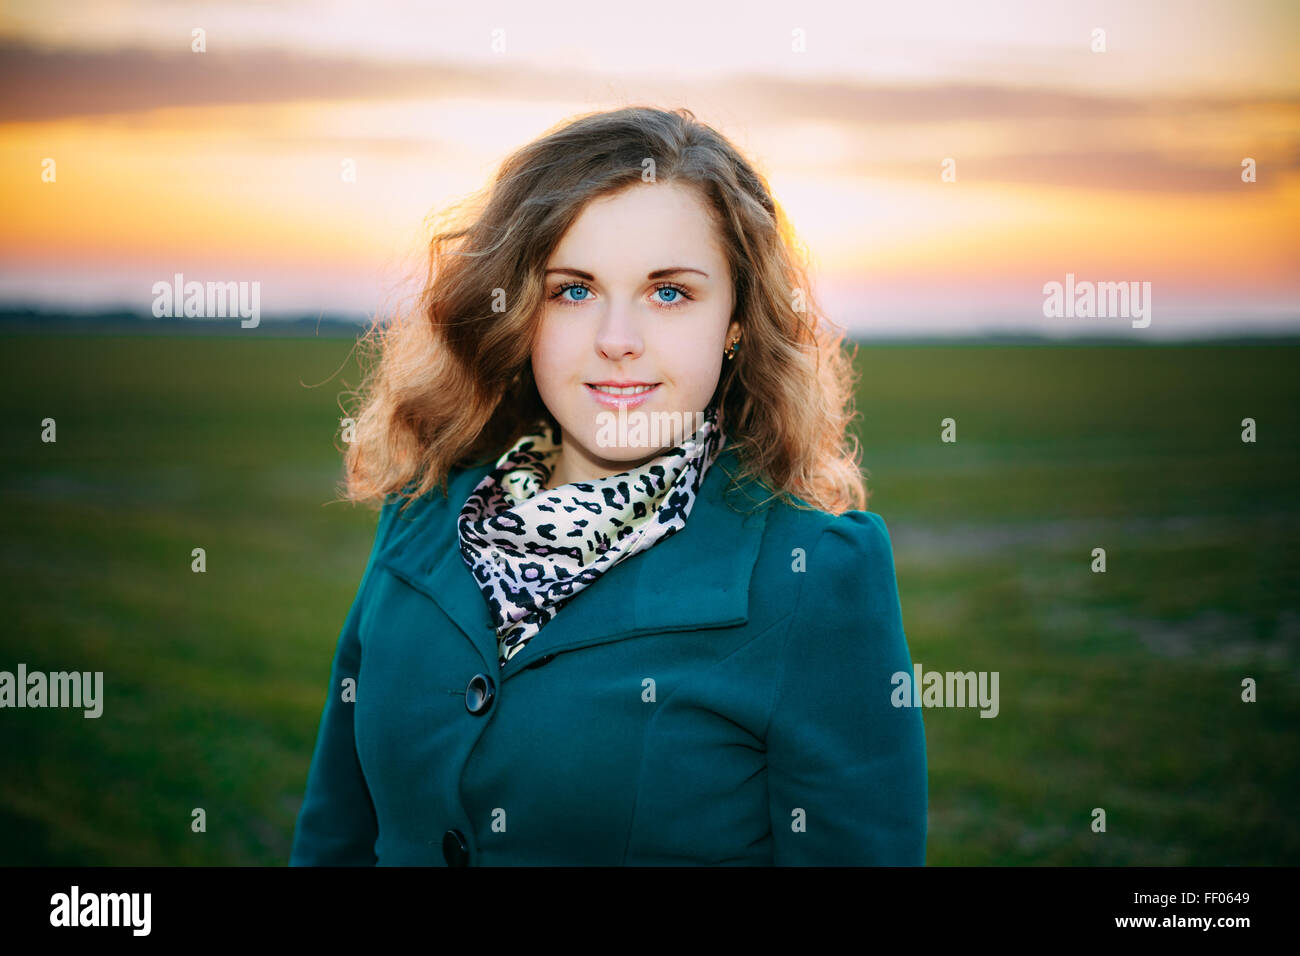 Portrait Of Beautiful Plus Size Young Woman In Blue Coat Posing In Field Meadow At Sunset Background. Spring, Outdoor Portrait Stock Photo